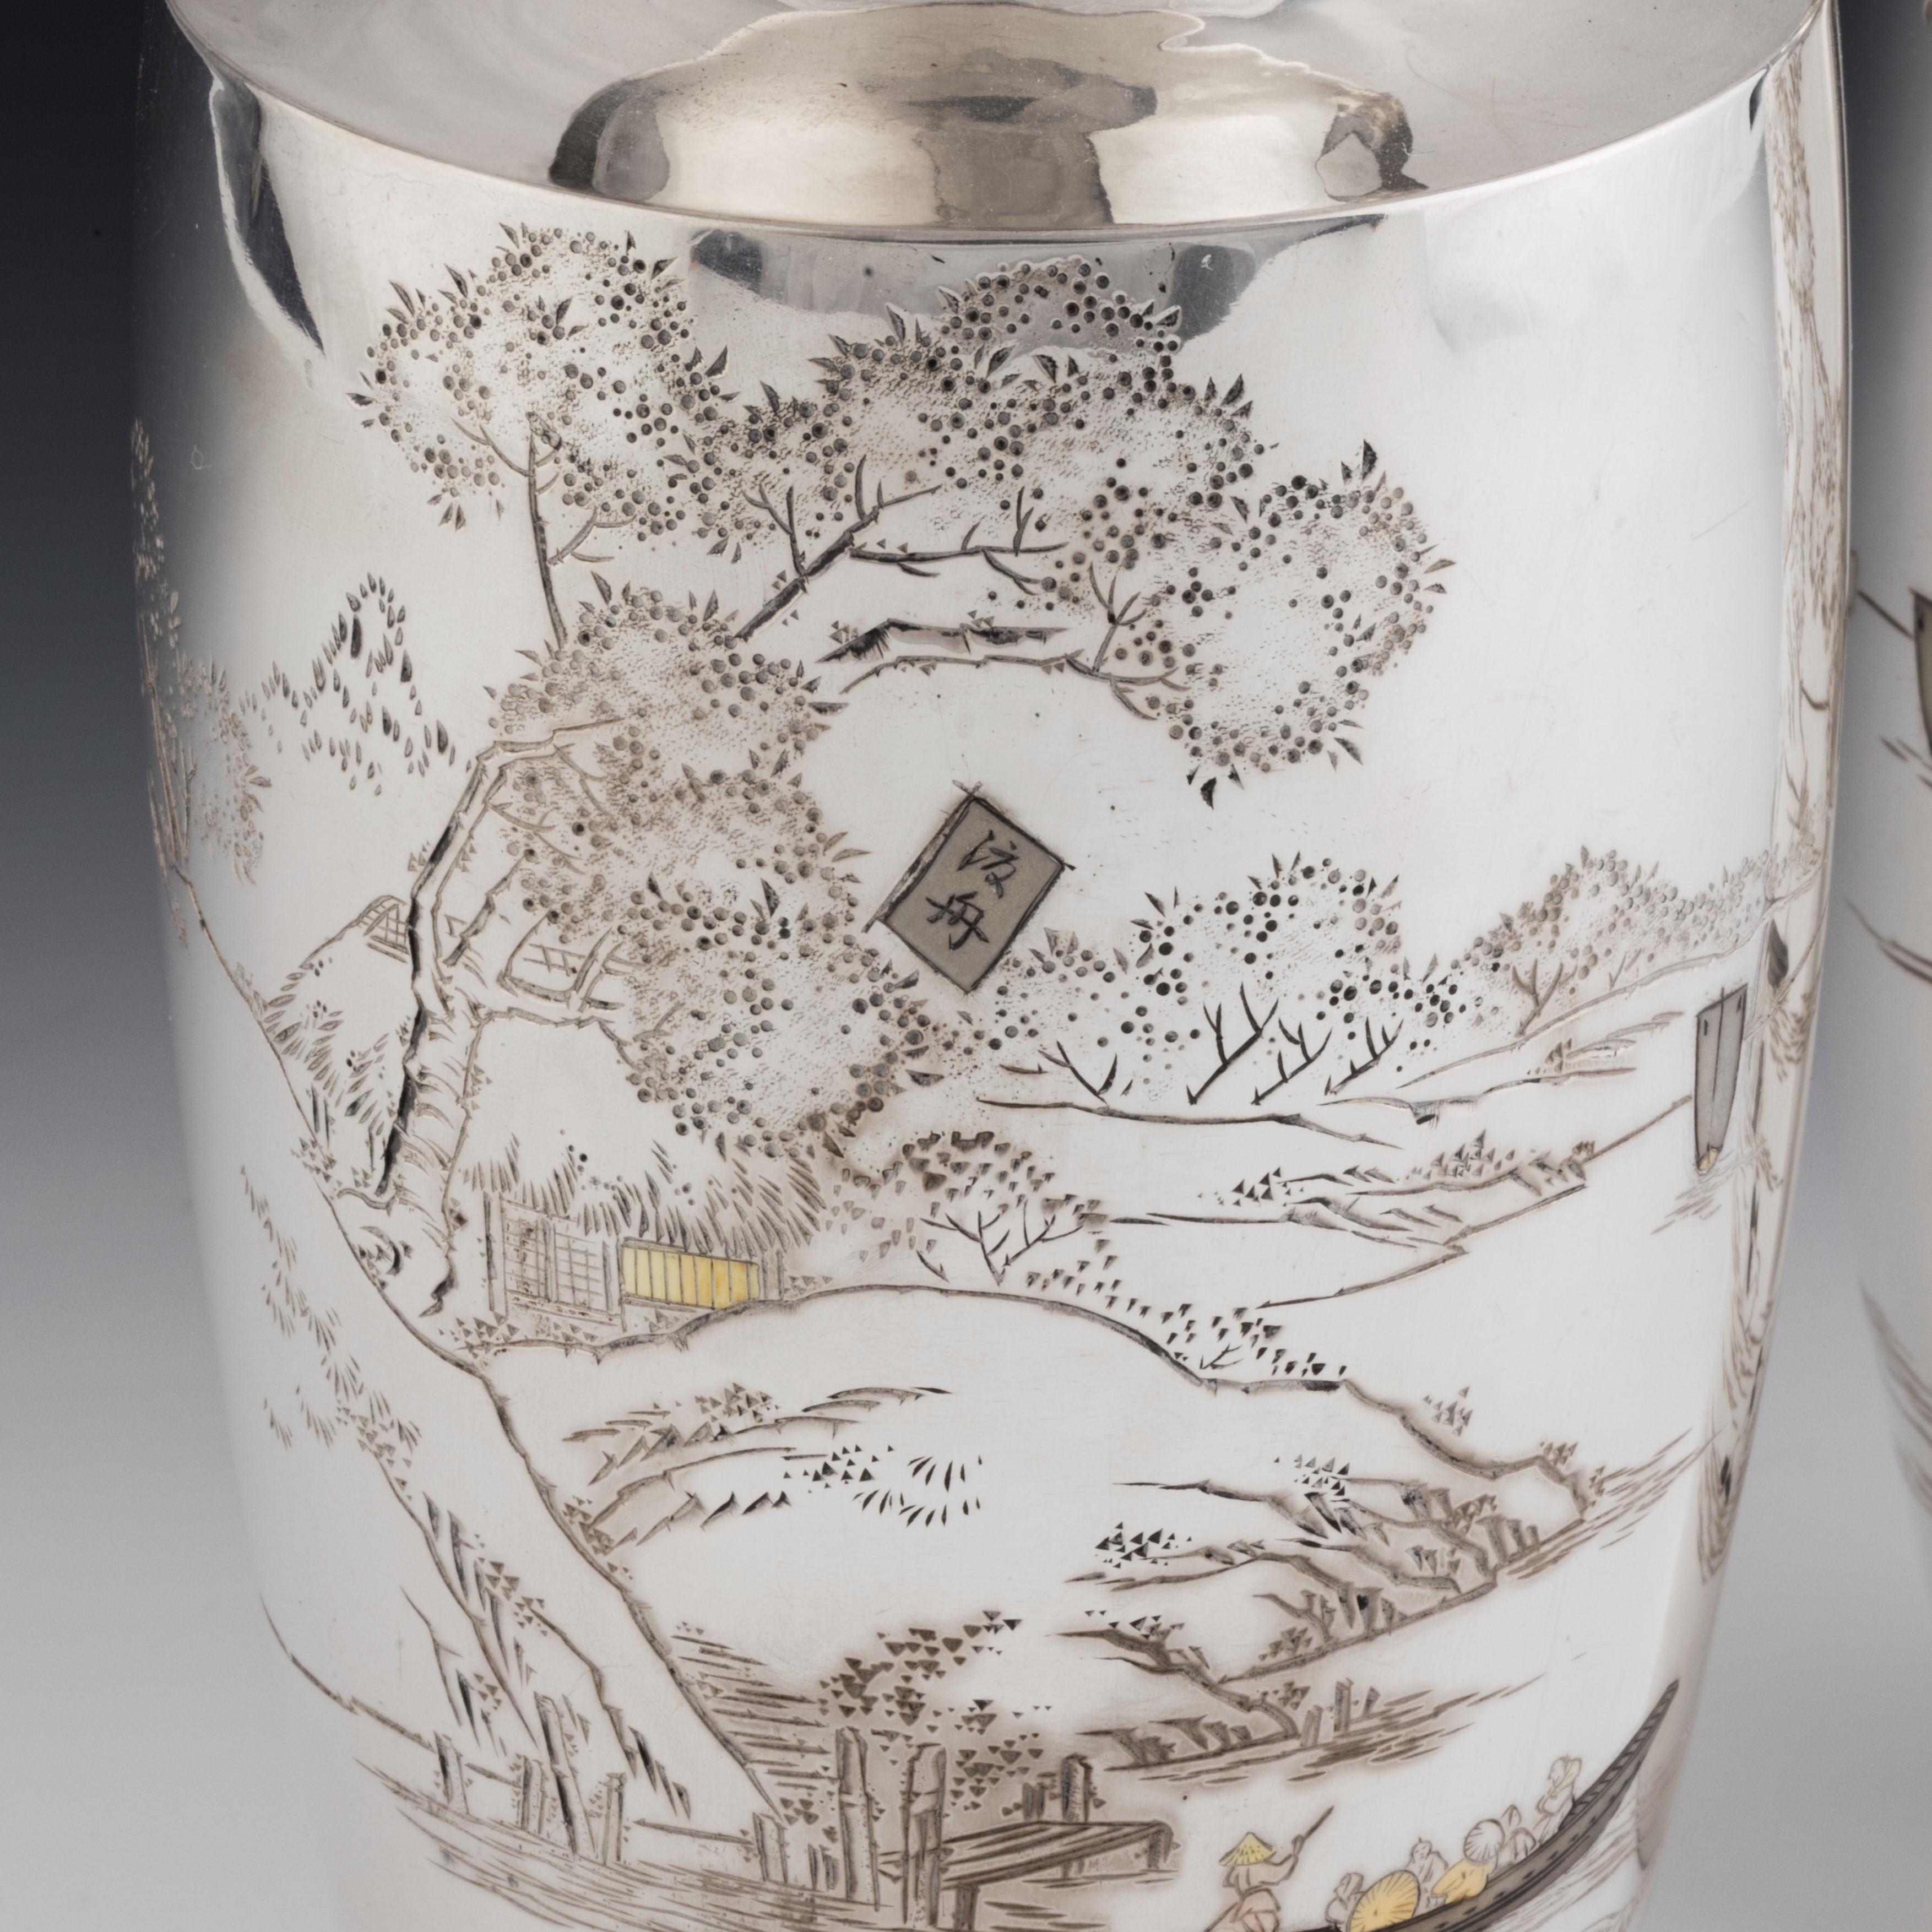 A pair of Taisho period silver vases, each with a waterside scene of sailing boats, punts, ducks and egrets by a jetty in front of flowering trees and hills, with some gilt detailing, signed and assay stamped. Japanese, circa 1920.
 